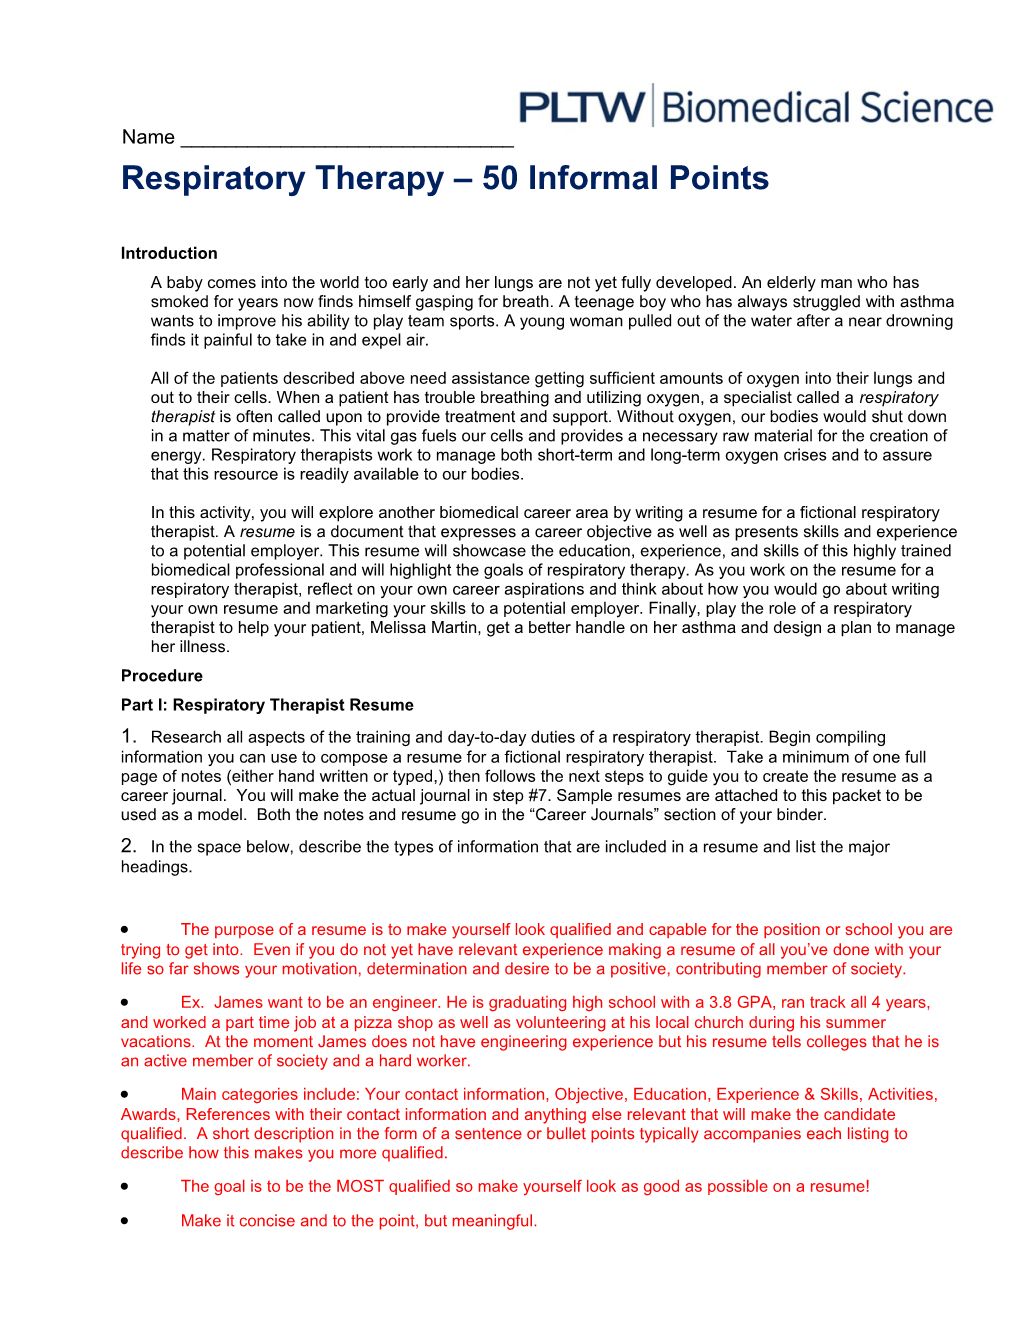 Respiratory Therapy 50 Informal Points